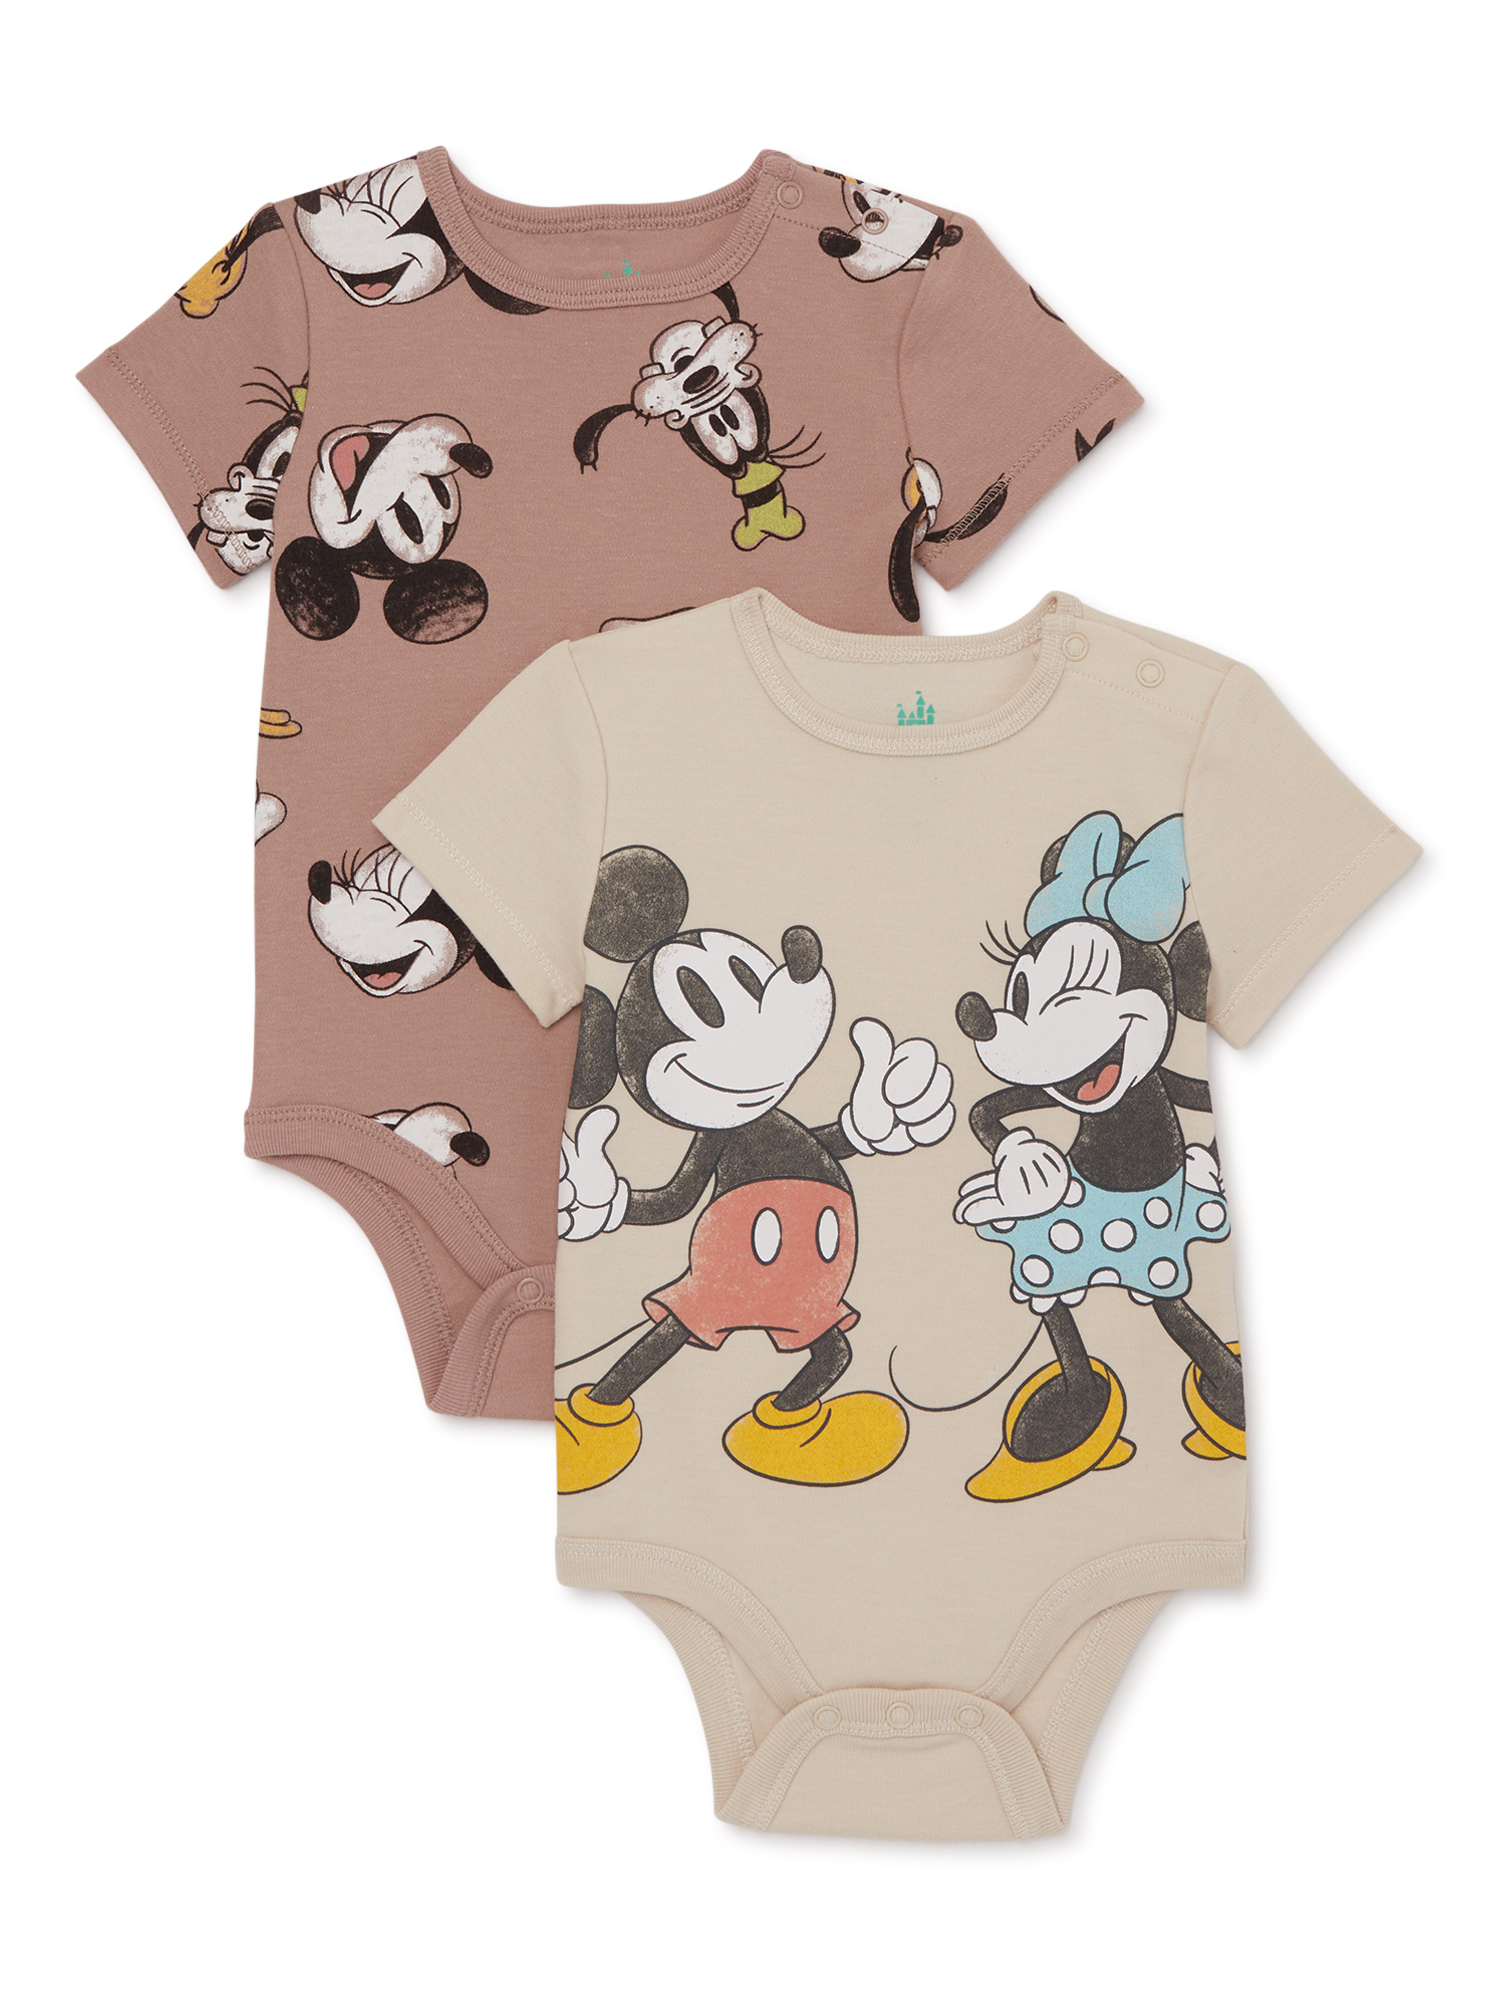 Mickey & Friends Baby Bodysuits with Short Sleeves, 2-Pack, Sizes 0/3M-24M - image 1 of 3